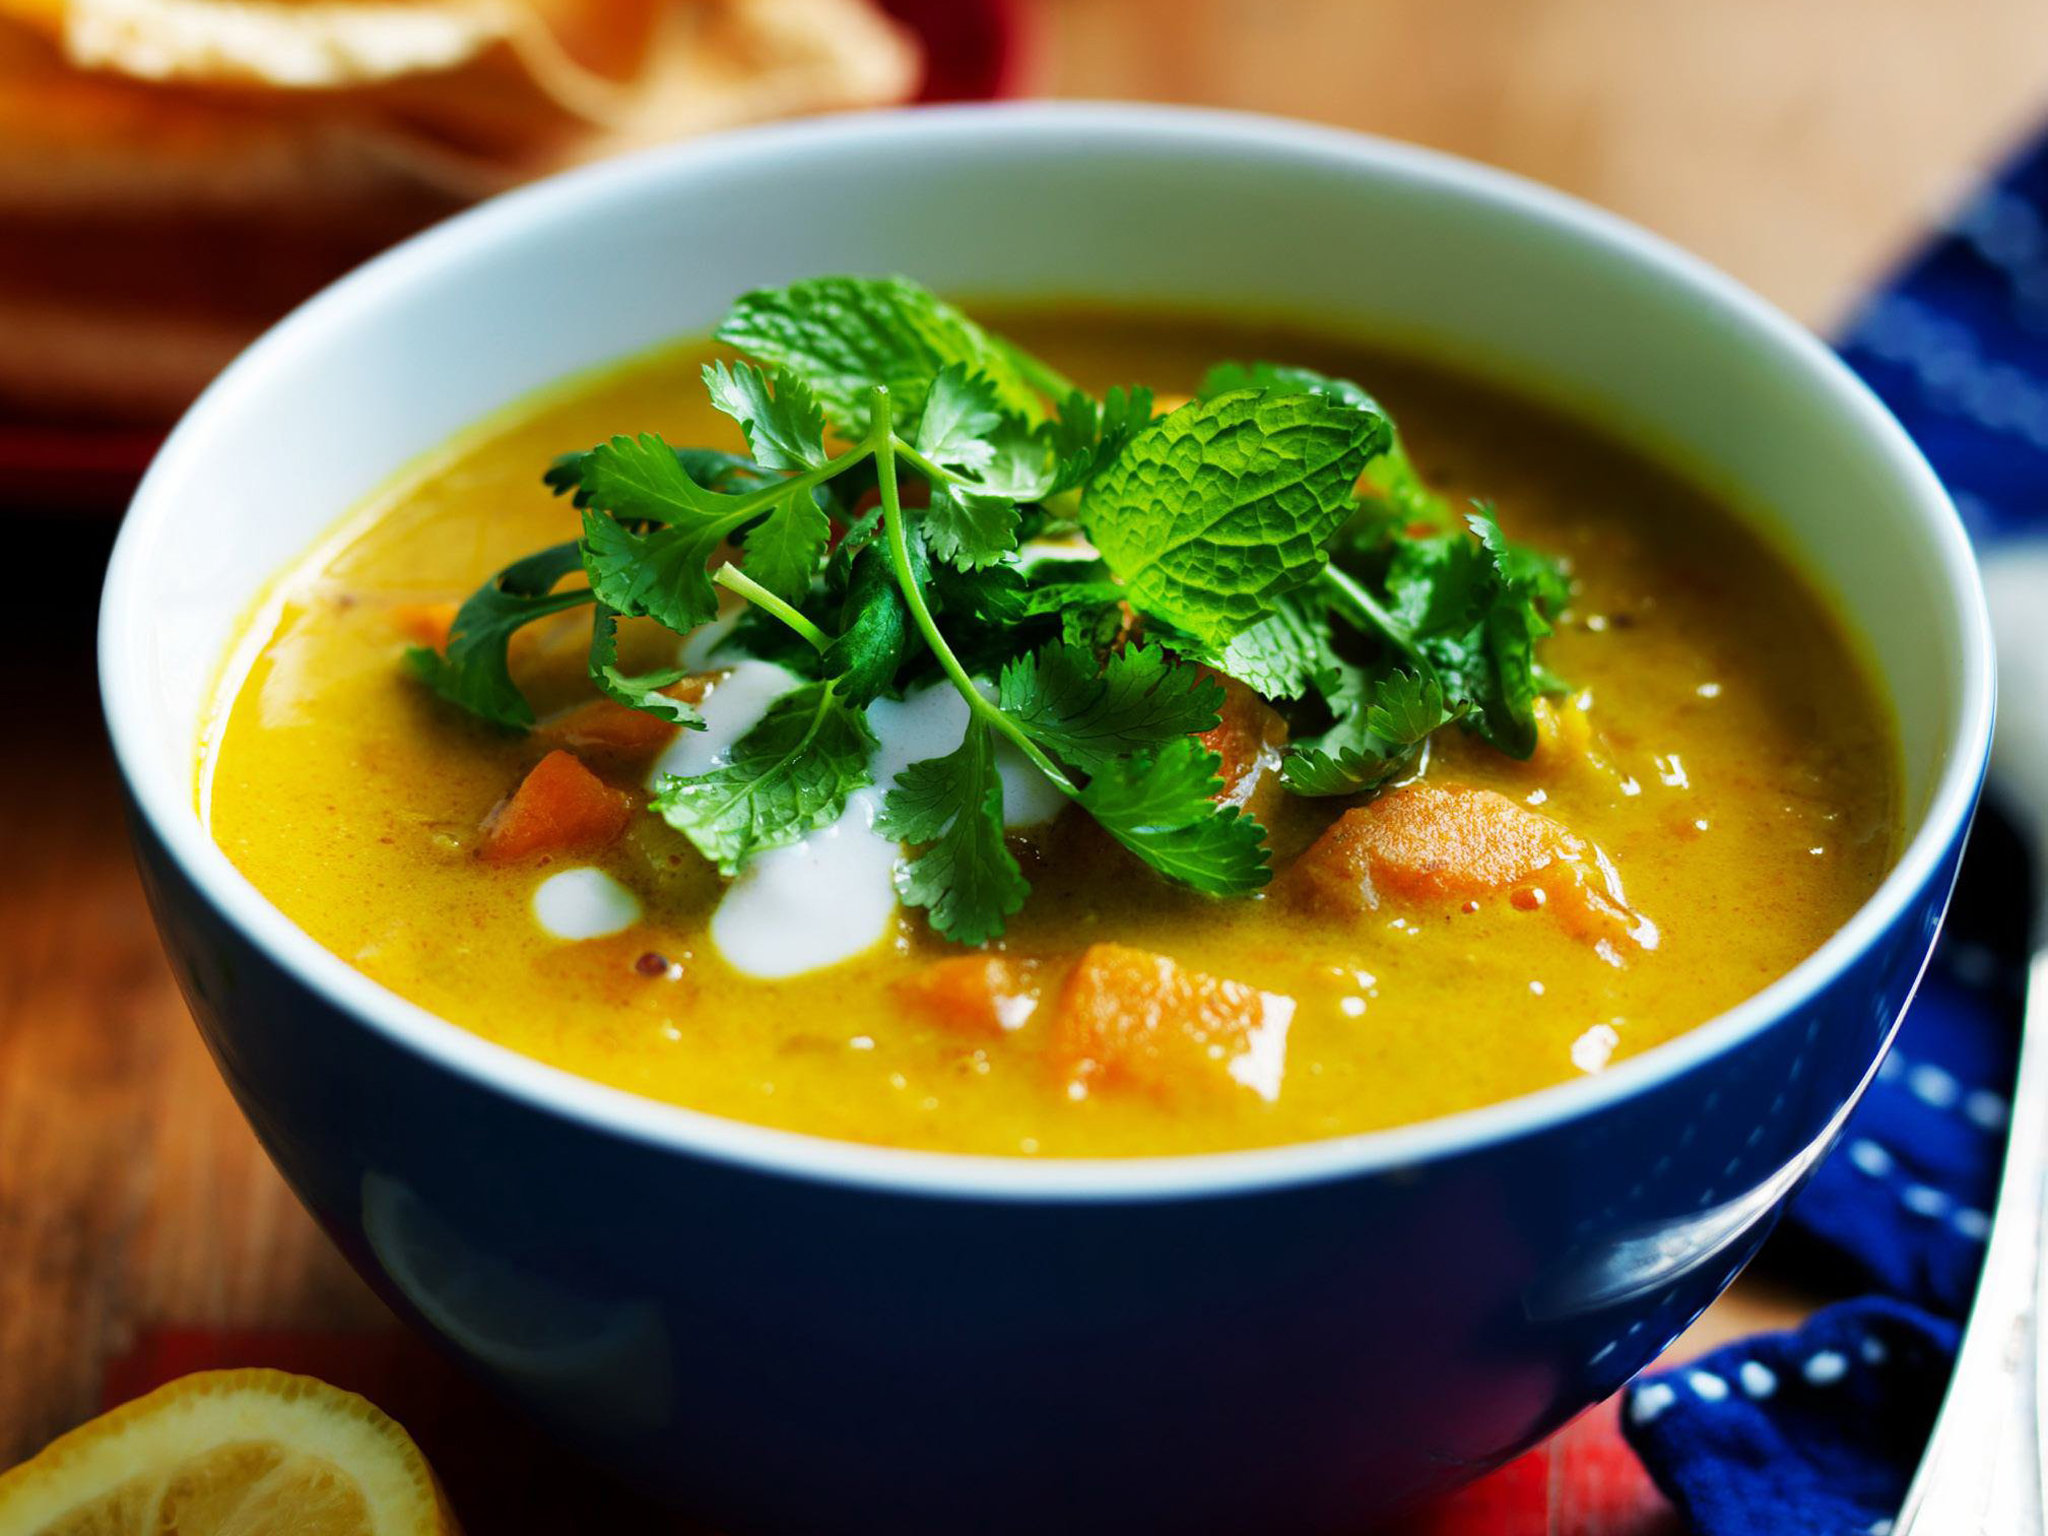 CURRIED KUMARA AND LENTIL SOUP